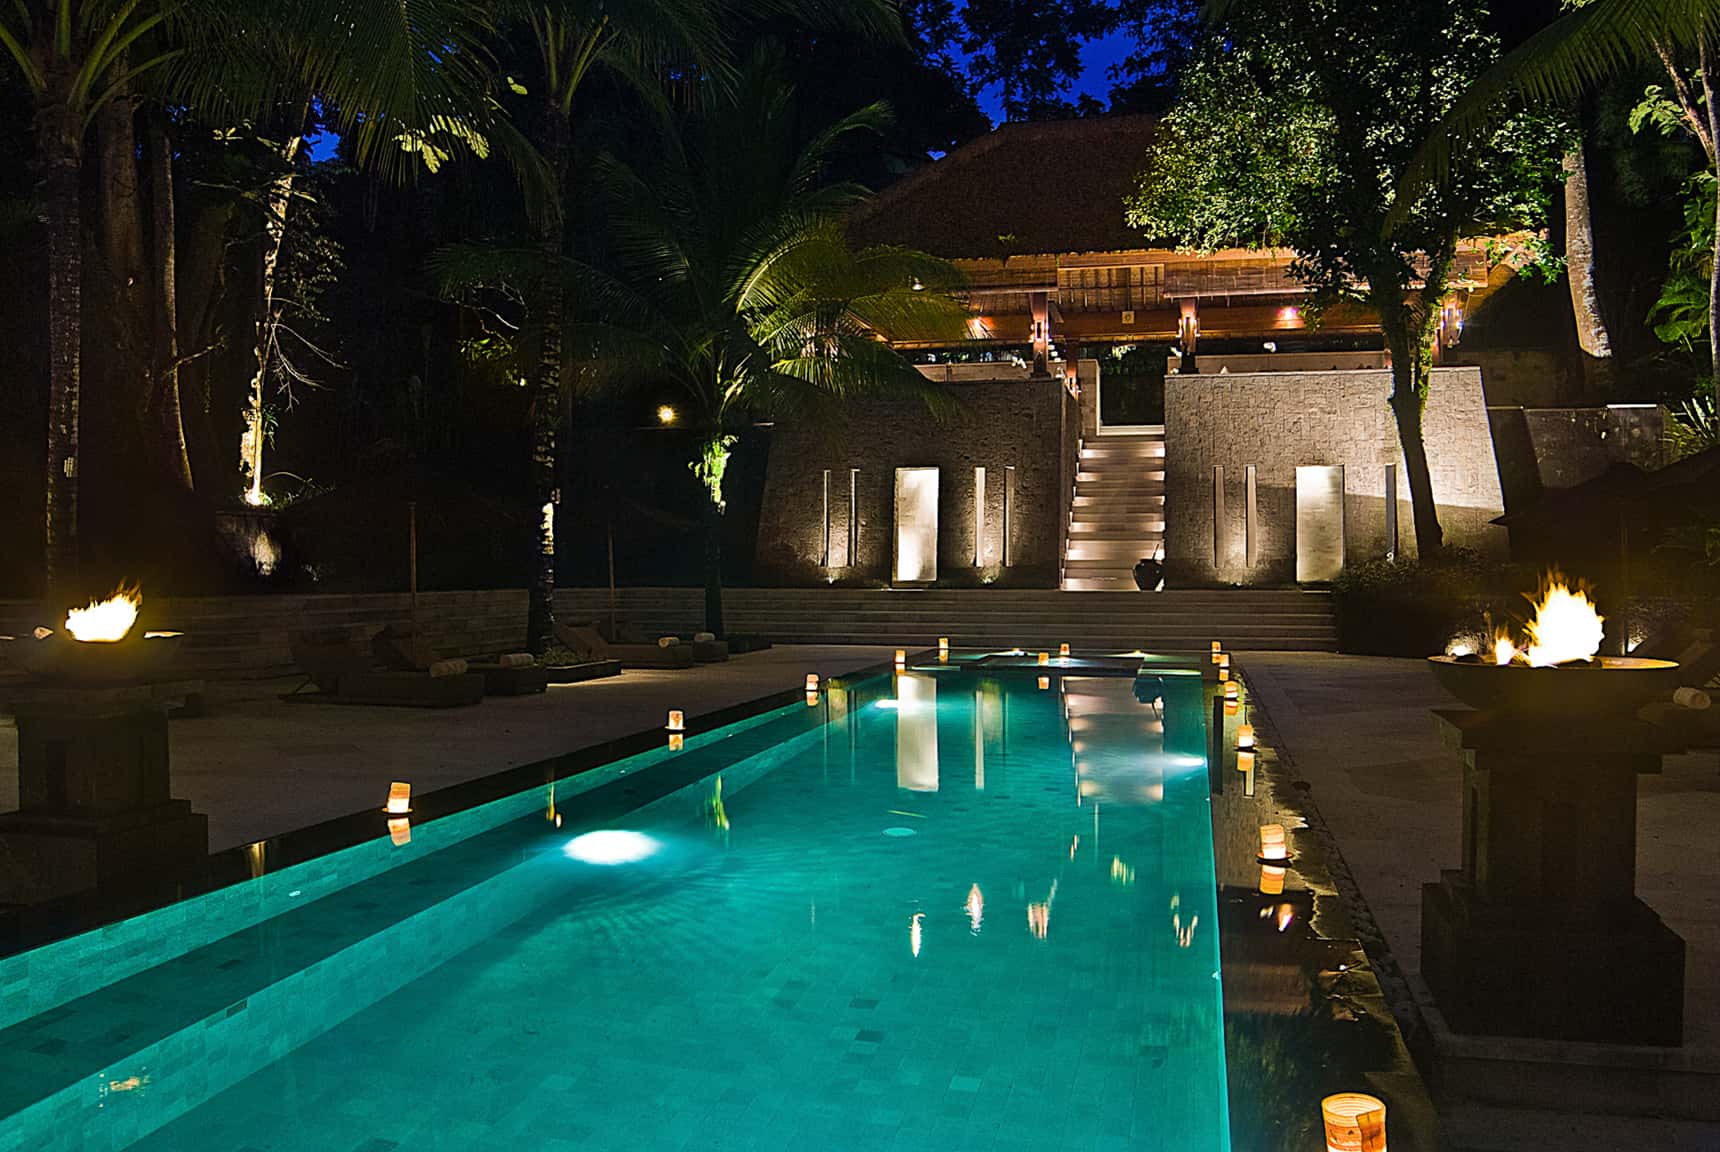 Editing digital photography of luxury hotels, resorts and villas by LuxViz: The Sanctuary Bali - night time pool views